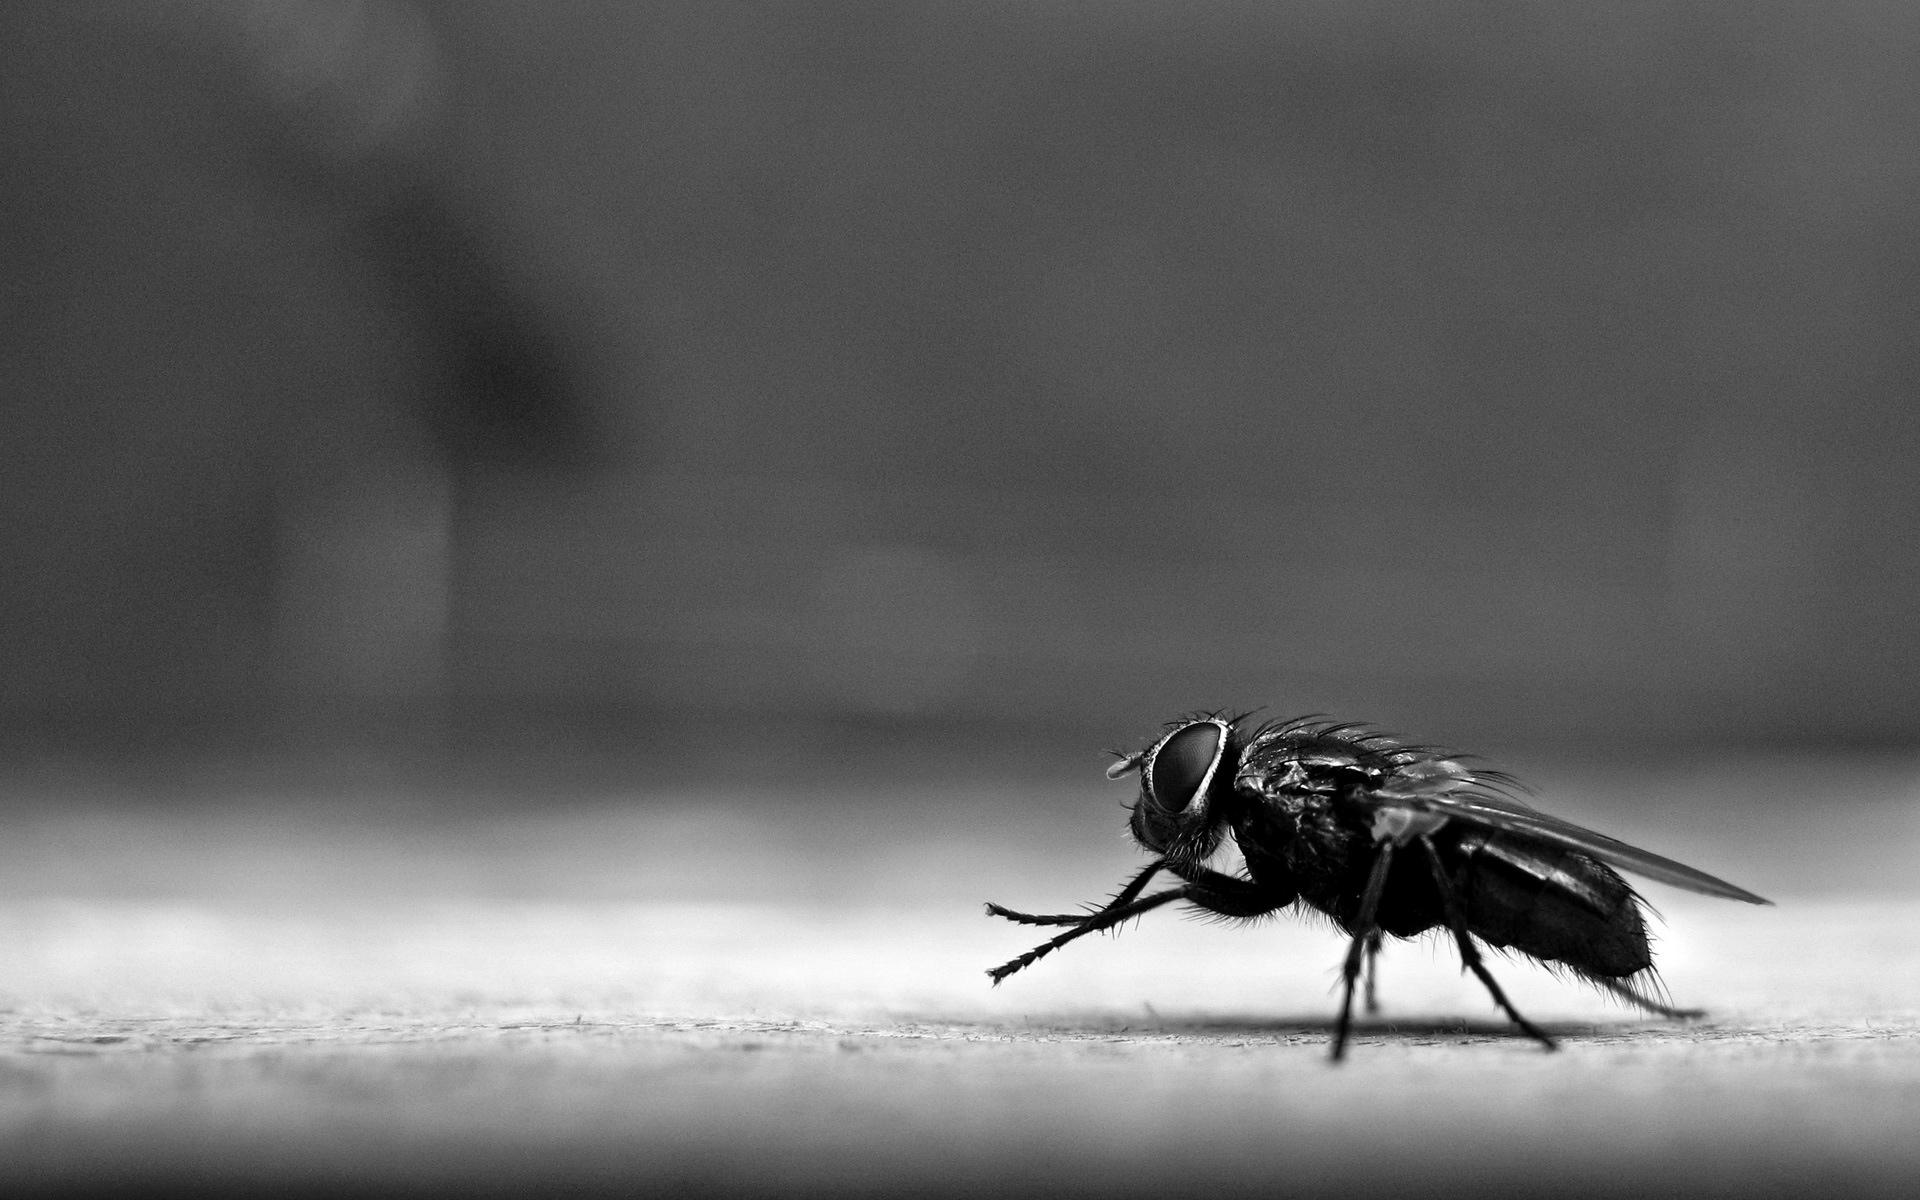 Fly Full Hd Wallpaper And Background Image 1920x1200 HD Wallpapers Download Free Map Images Wallpaper [wallpaper376.blogspot.com]